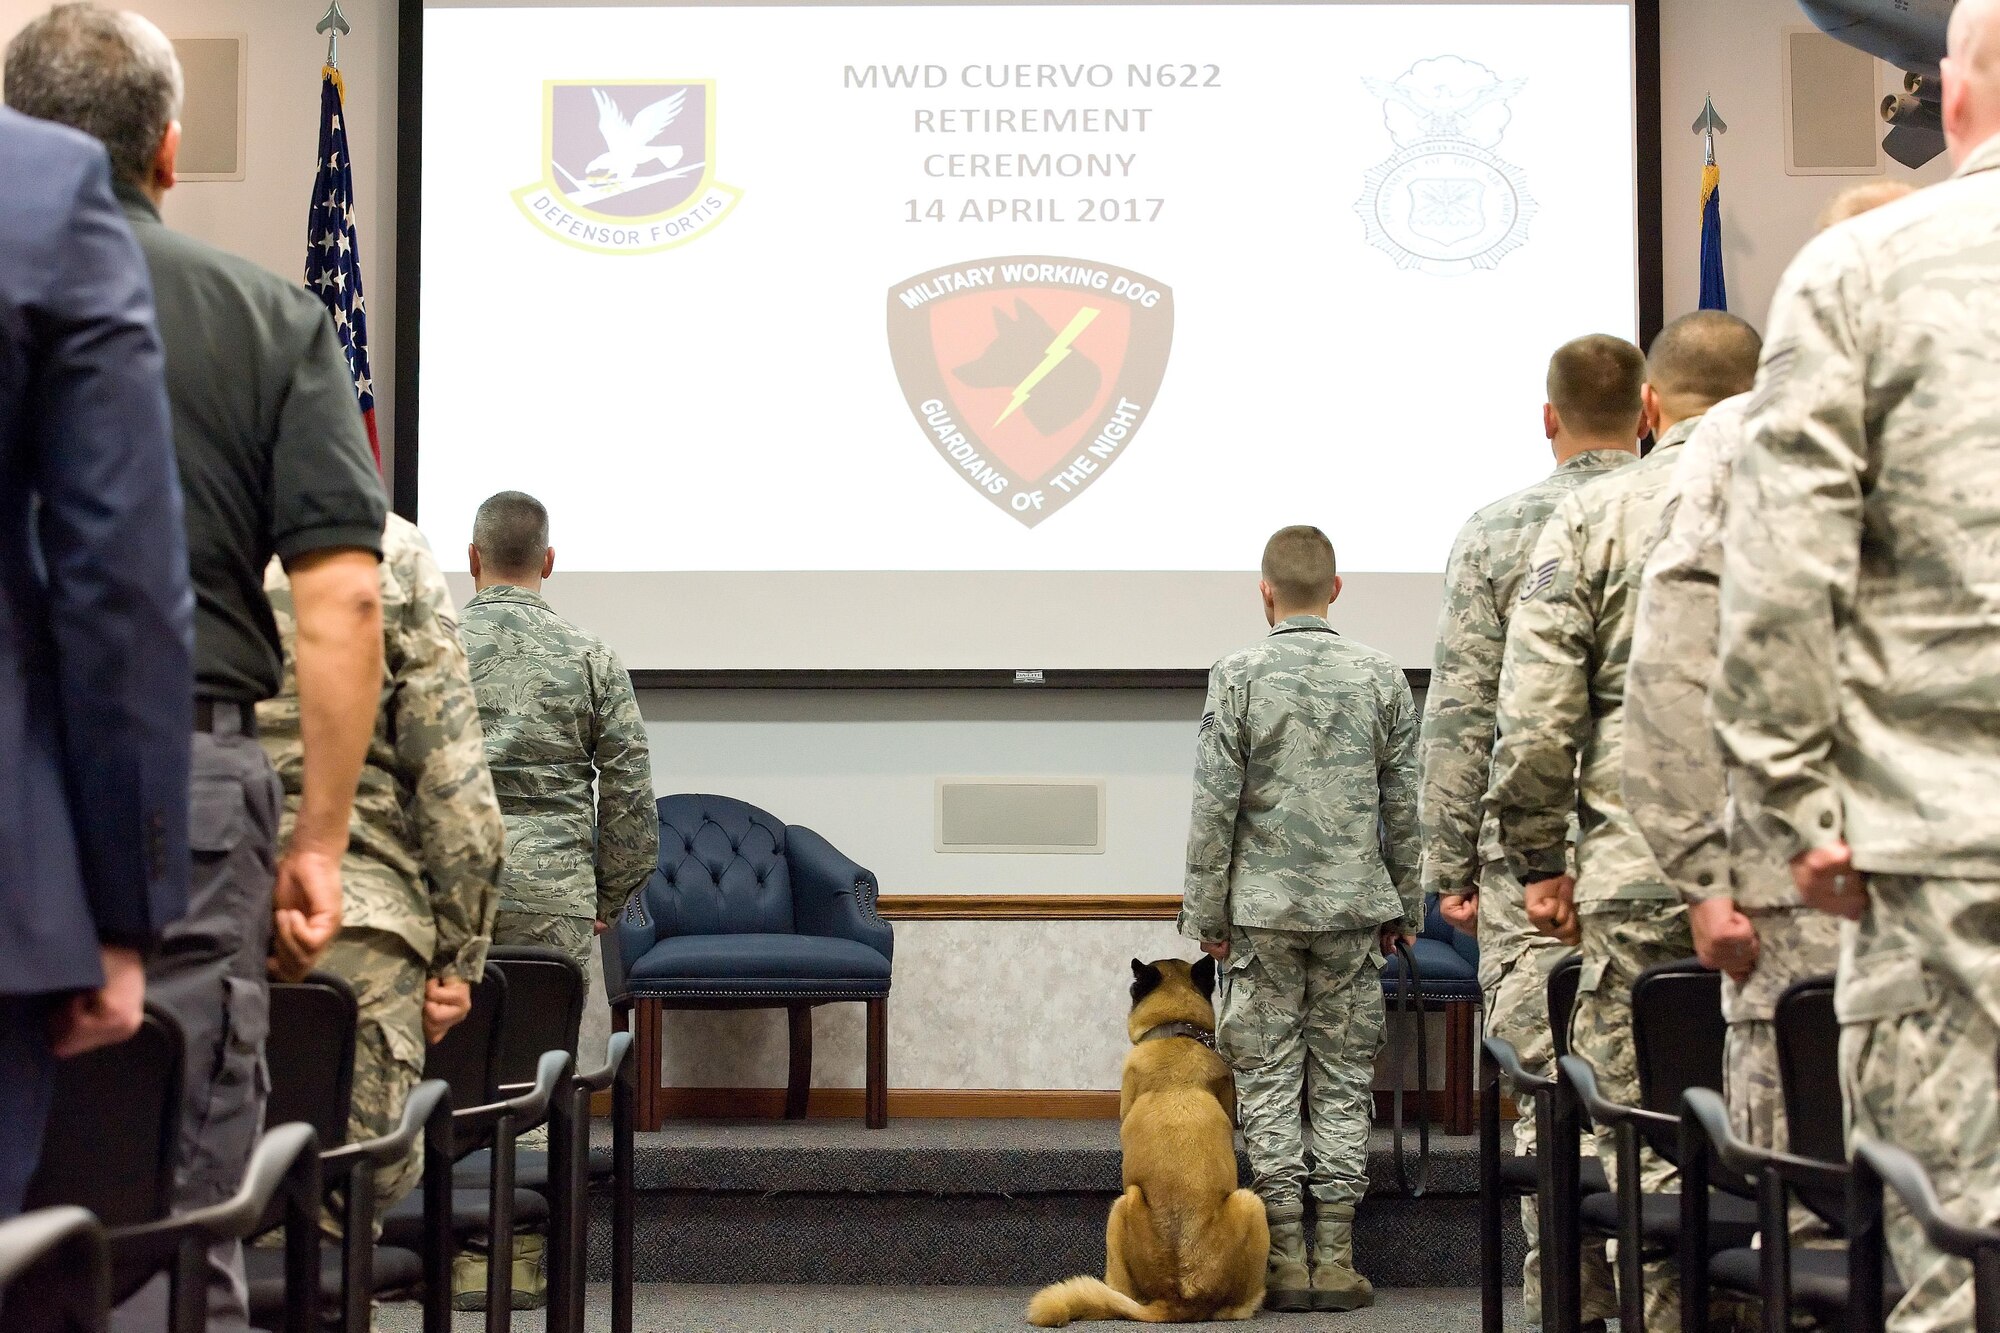 At his retirement ceremony, Military Working Dog Cuervo, N622, assigned to the 436th Airlift Wing, 436th Security Forces Squadron, sits next to his MWD handler Senior Airman Alexander Cormier, April 14, 2017, on Dover Air Force Base, Del. MWD Cuervo retired from active duty after serving more than seven years. (U.S. Air Force photo by Roland Balik)